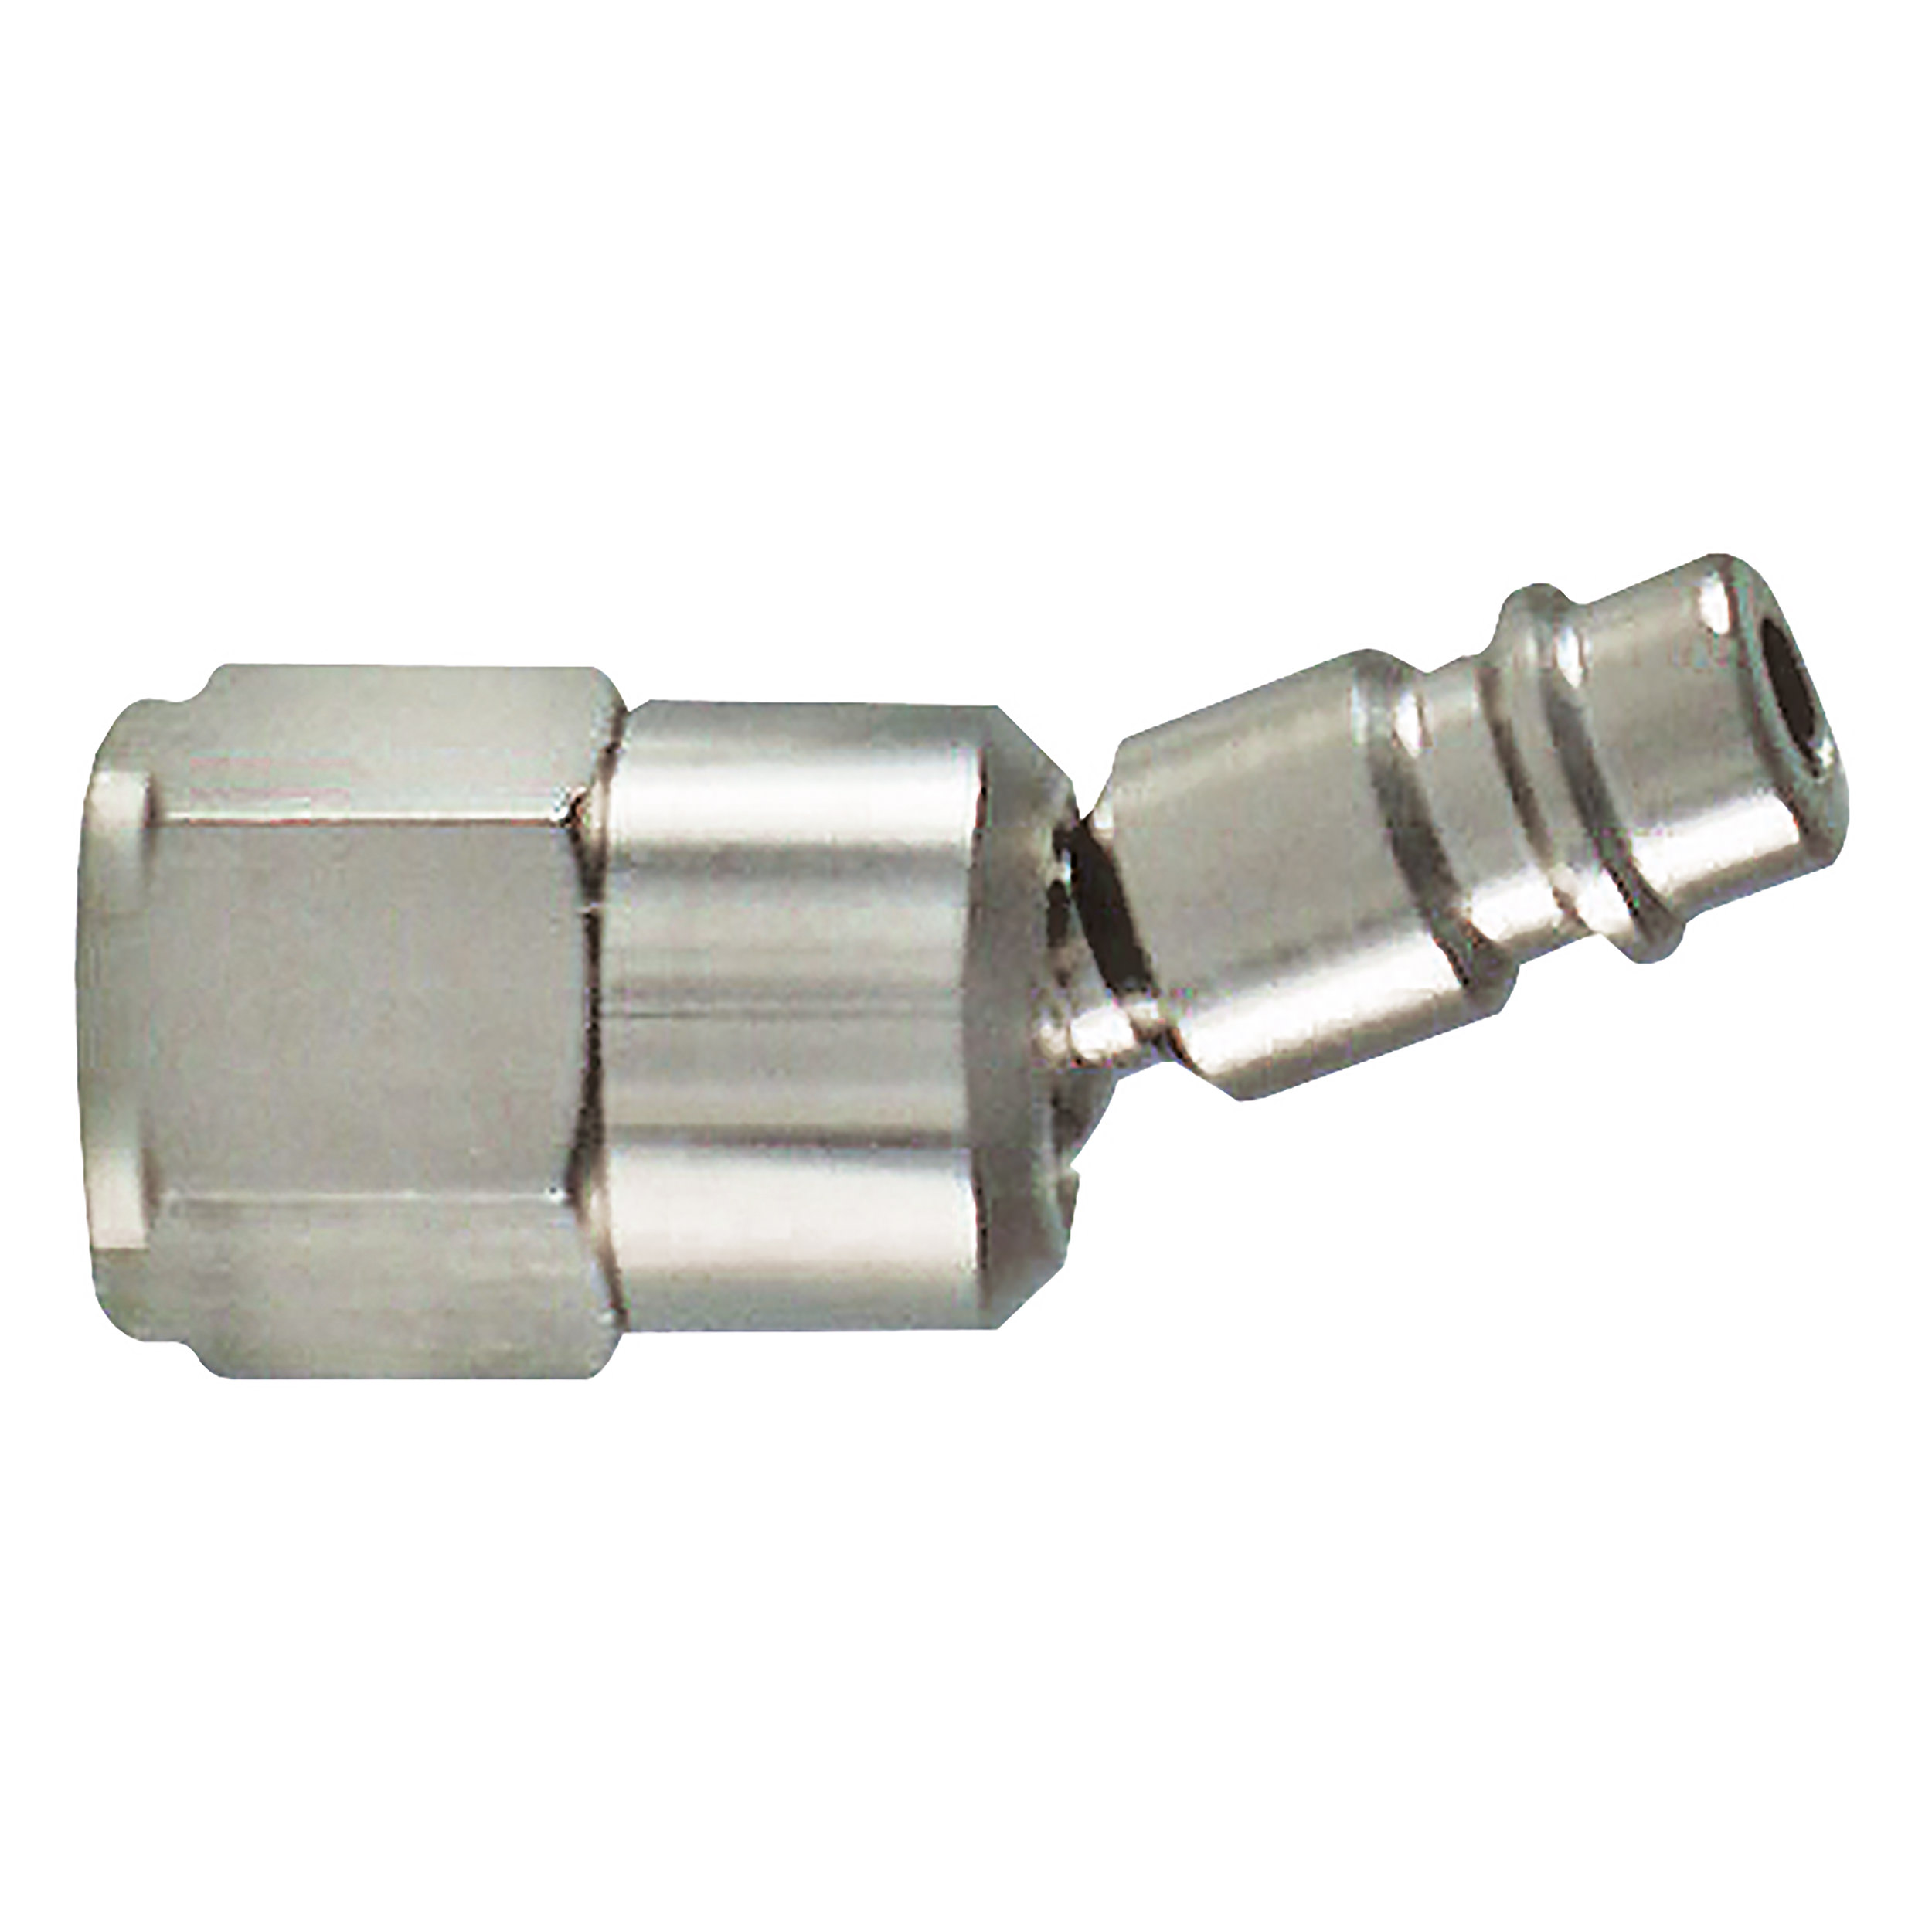 Swivel joint connector DN 7.2, QN 1,000 Nl/min, MOP 362.5 psi, rotation axis 360°, piv. connector 30°, G¼ female, L: 52 mm, AF 21